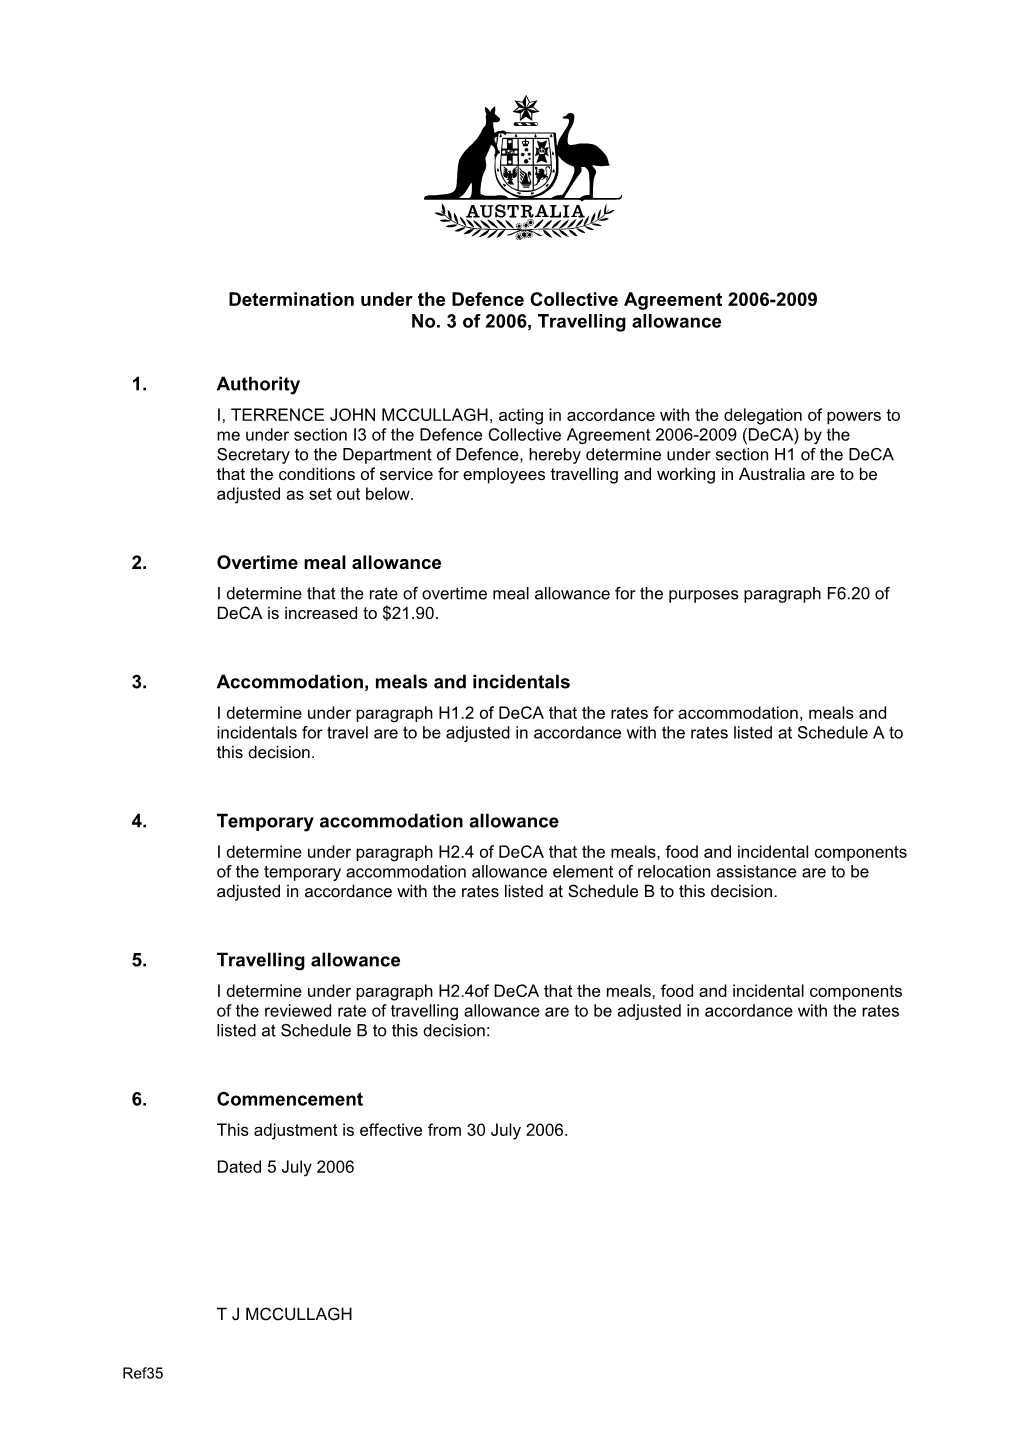 Determination Under the Defence Collective Agreement 2006-2009No. 3 of 2006,Travelling Allowance